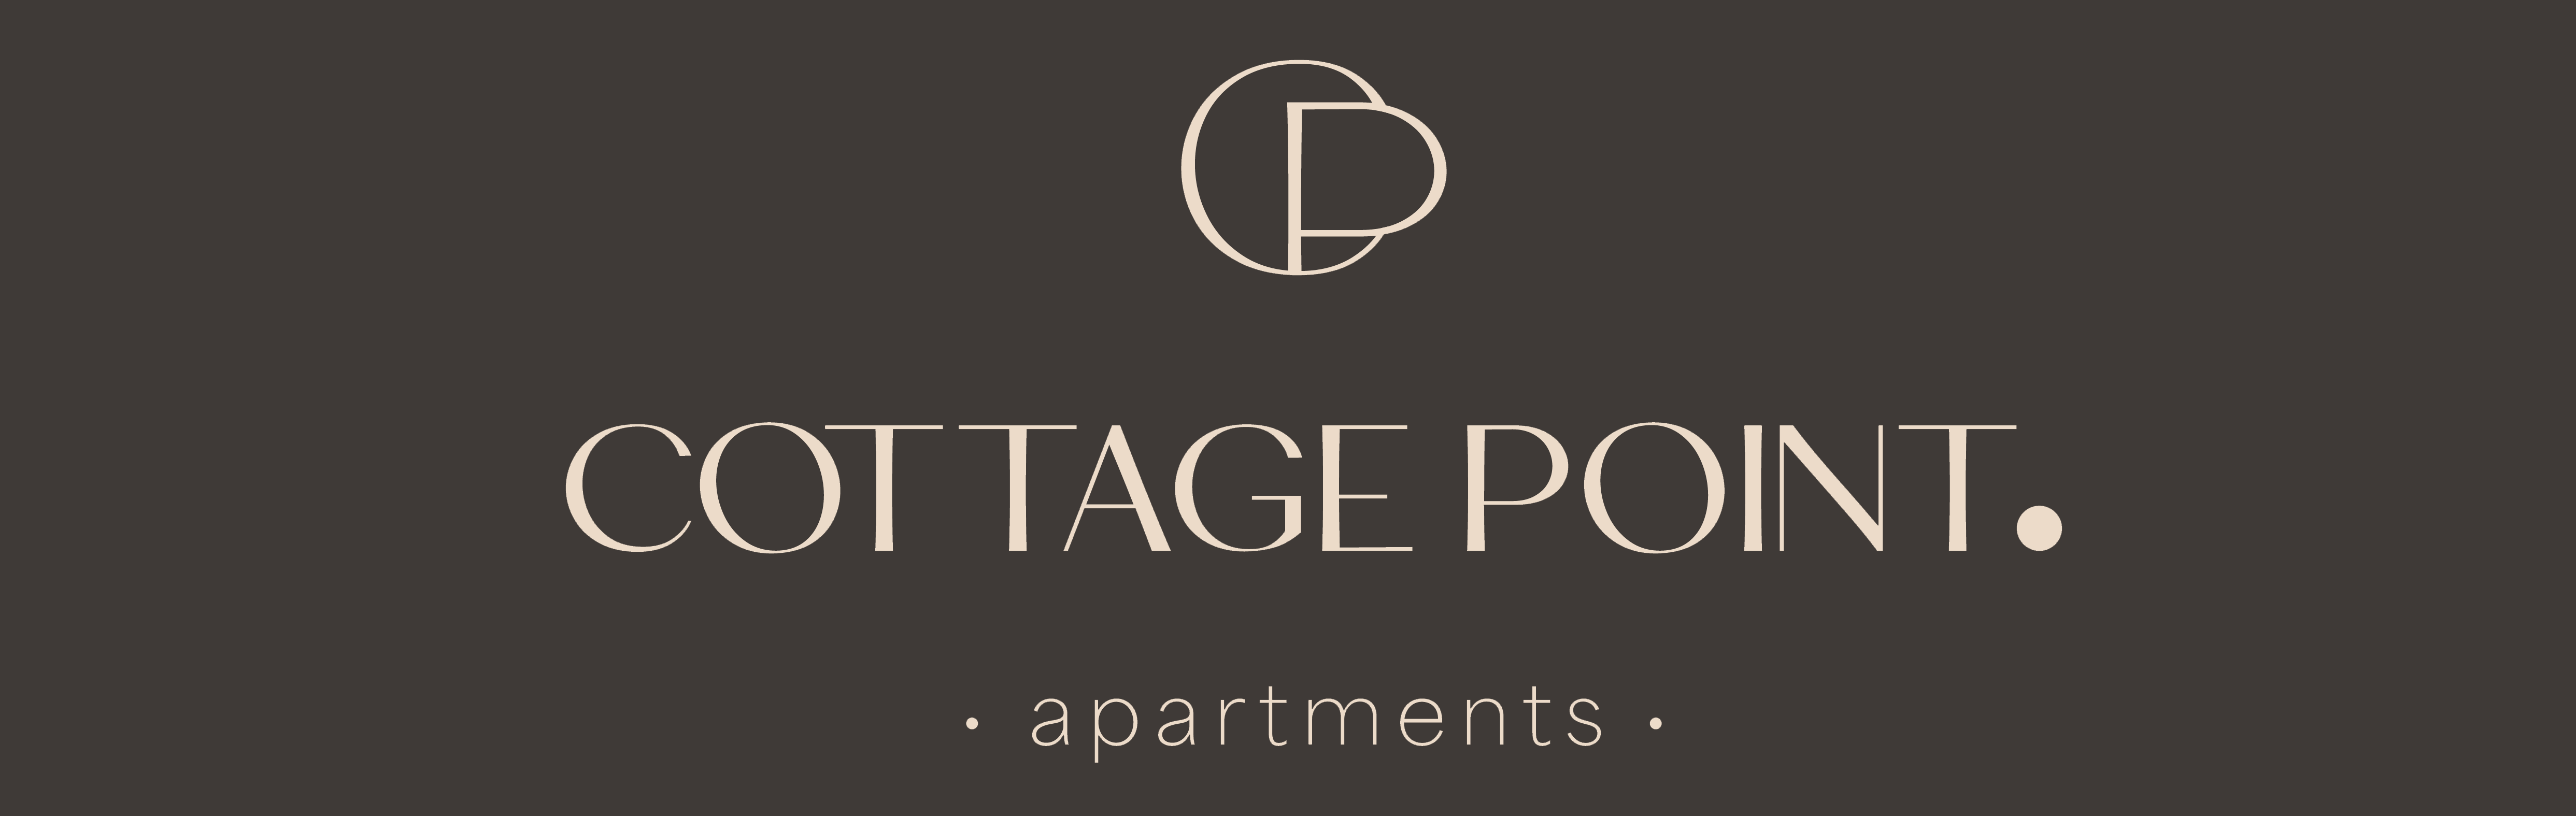 Cottage Point Apartments in Lubbock